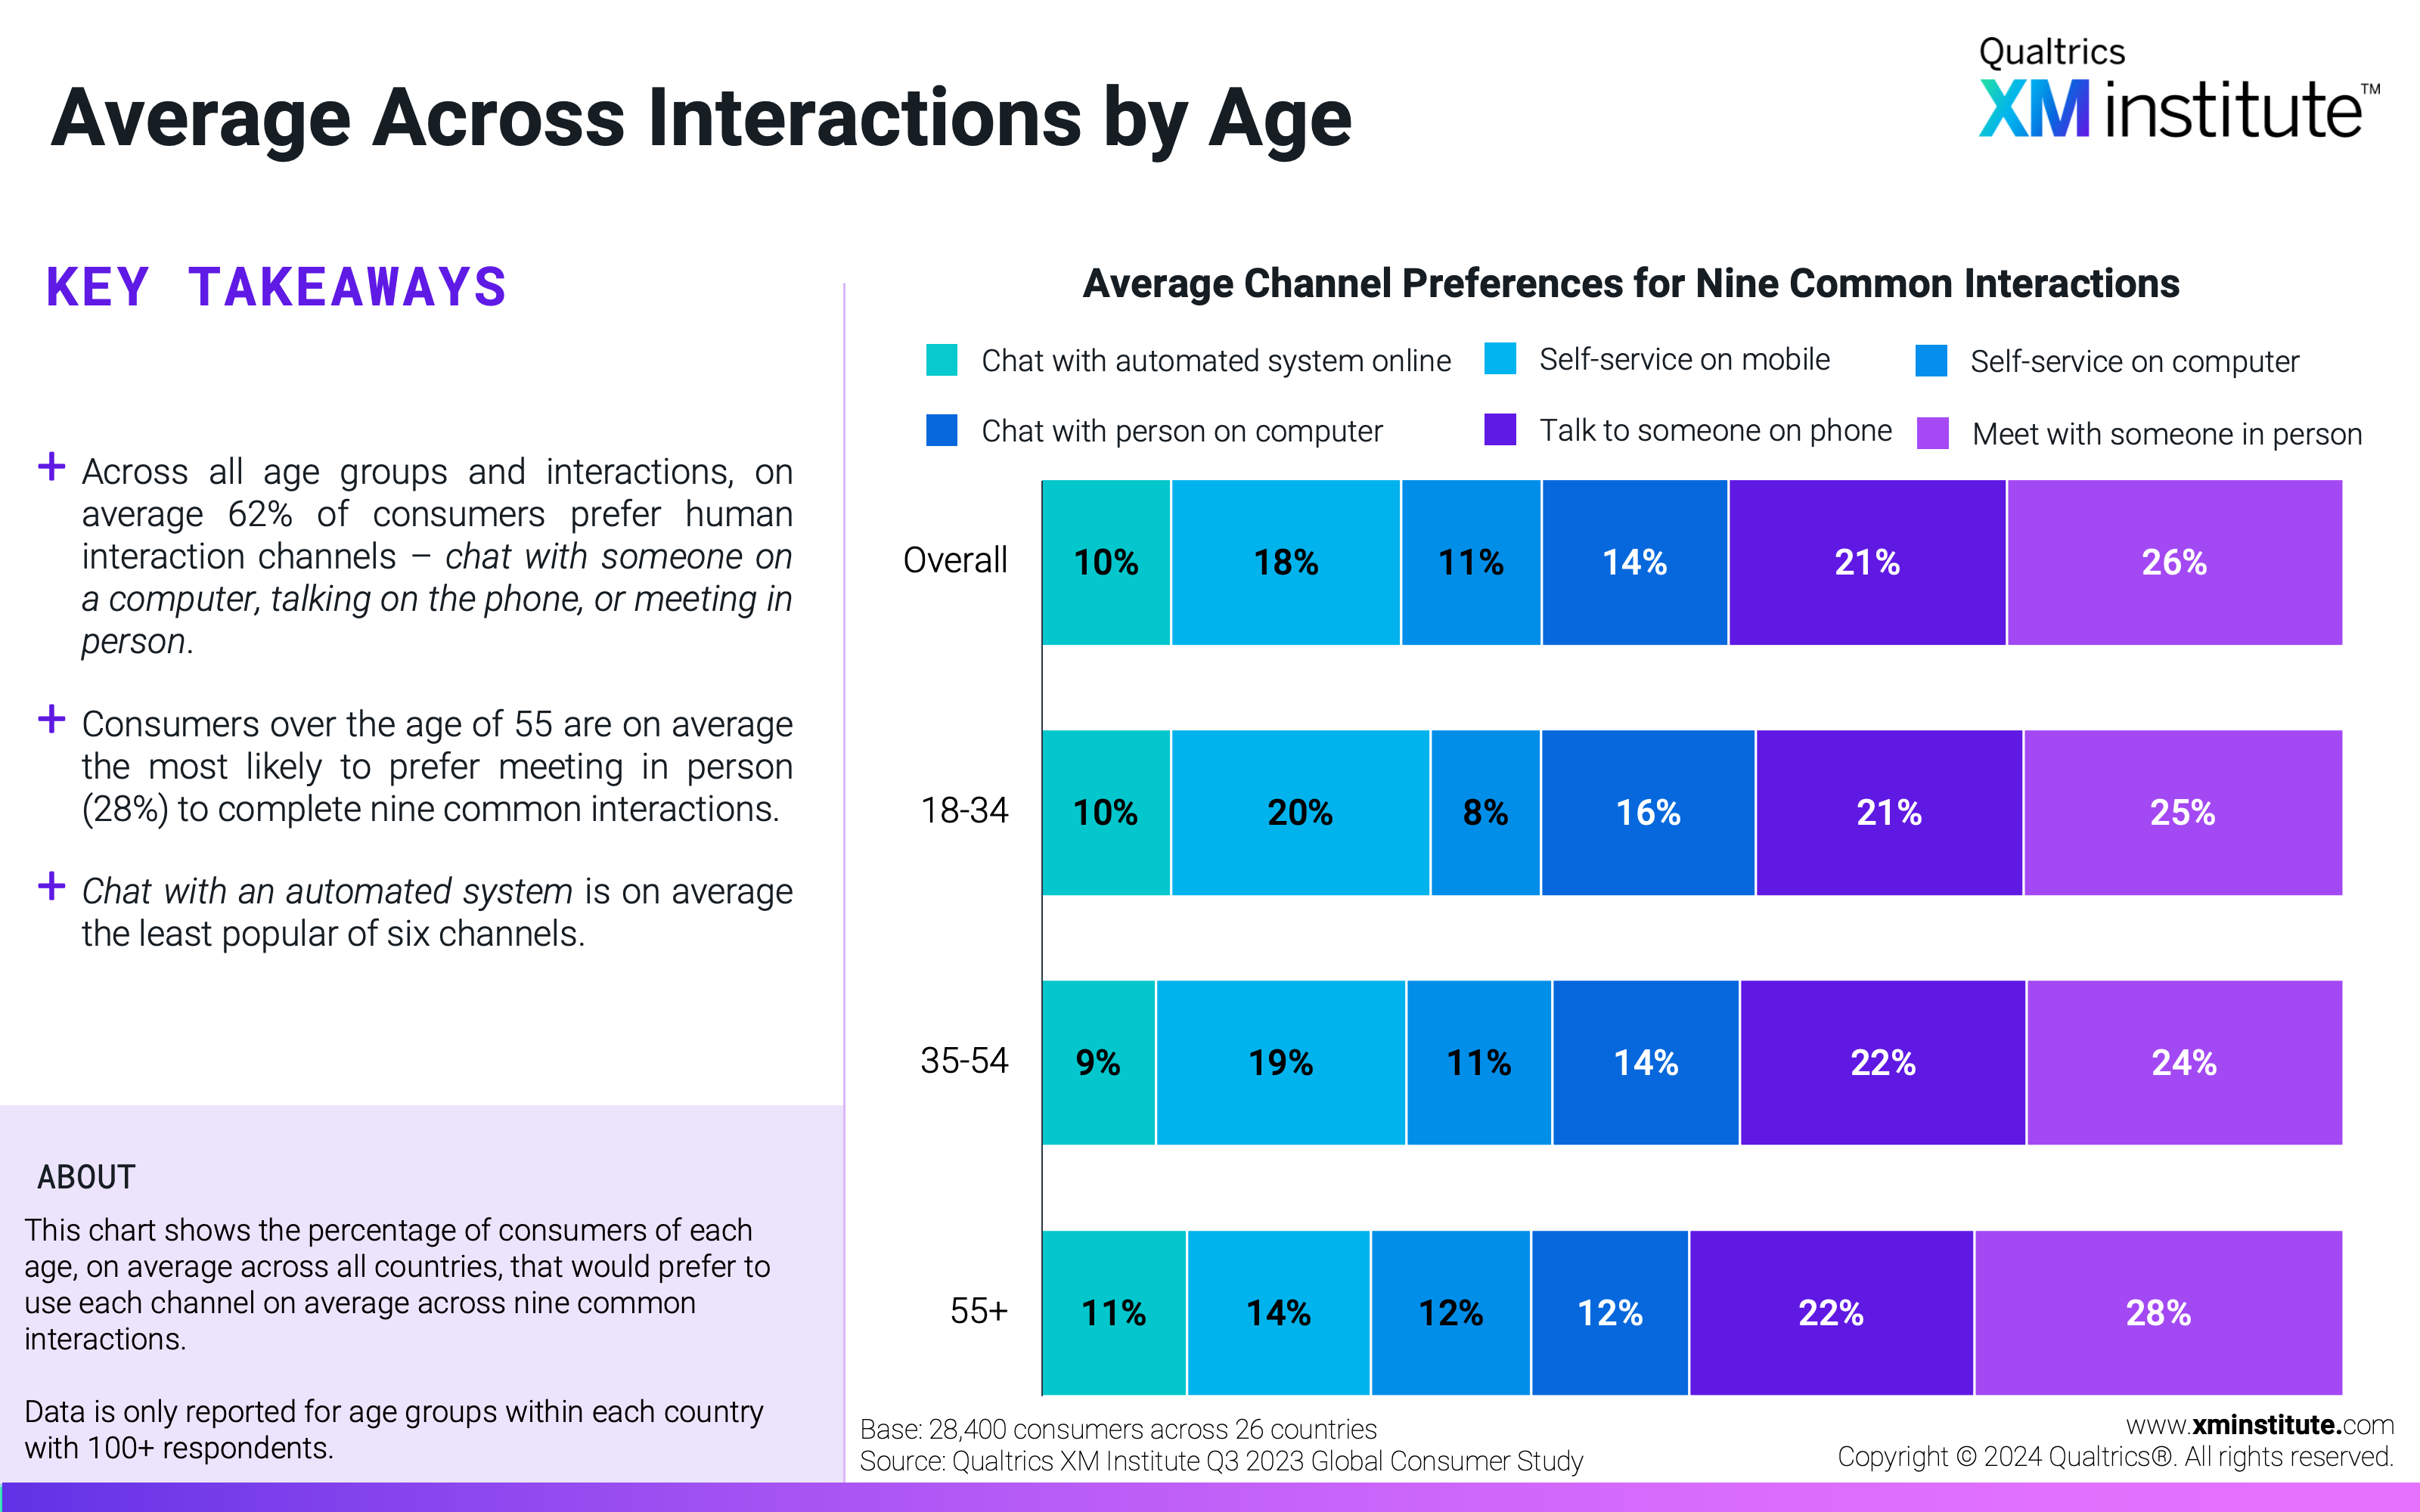 This chart shows the percentage of consumers of each age, on average across all countries, that would prefer to use each channel on average across nine common interactions. 